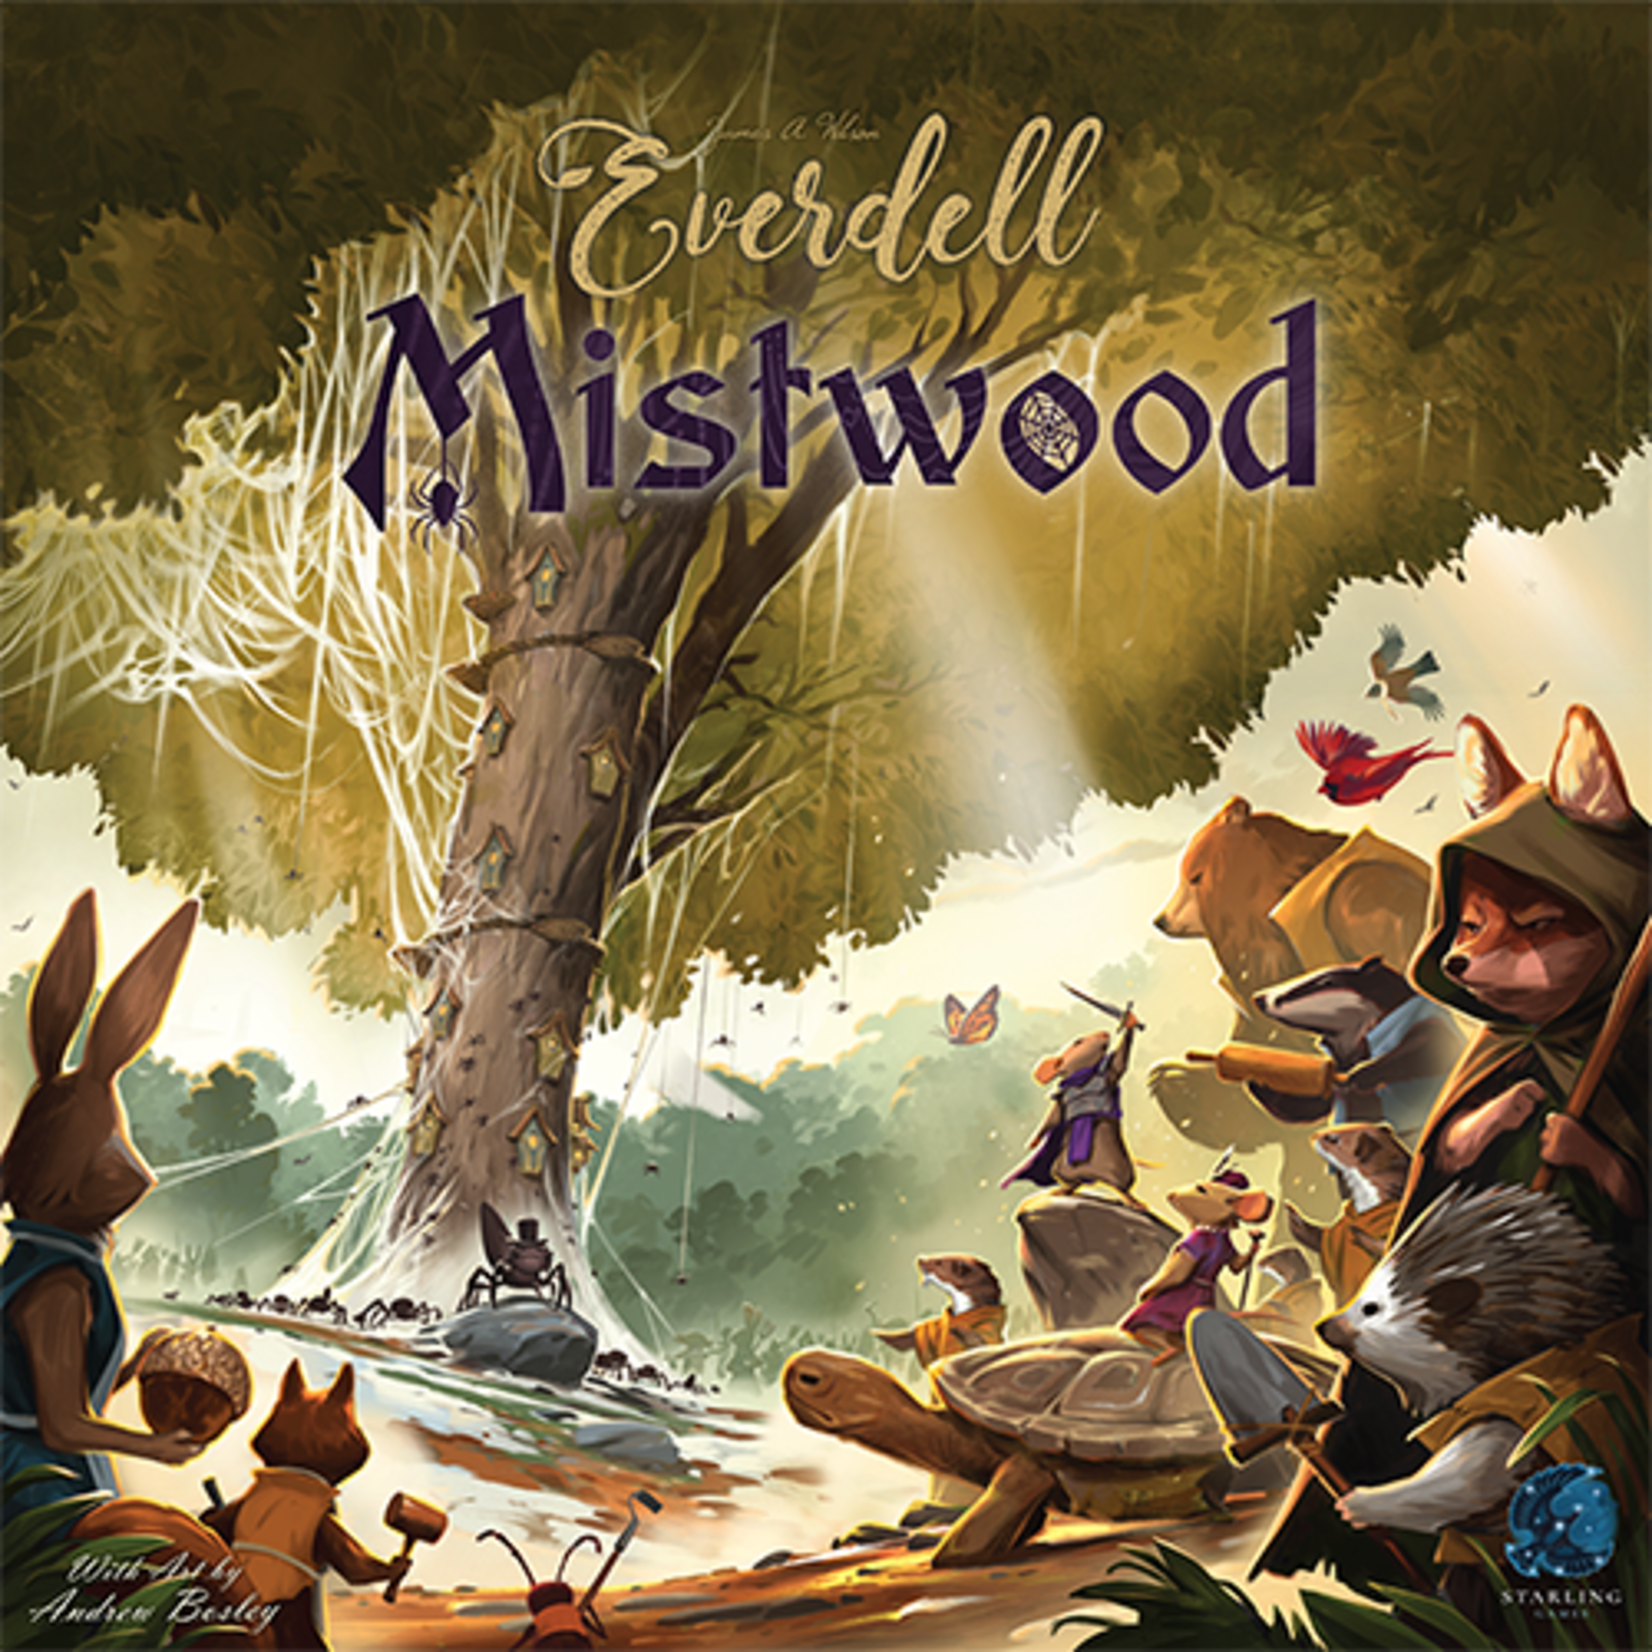 Tabletop Tycoon Everdell Mistwood